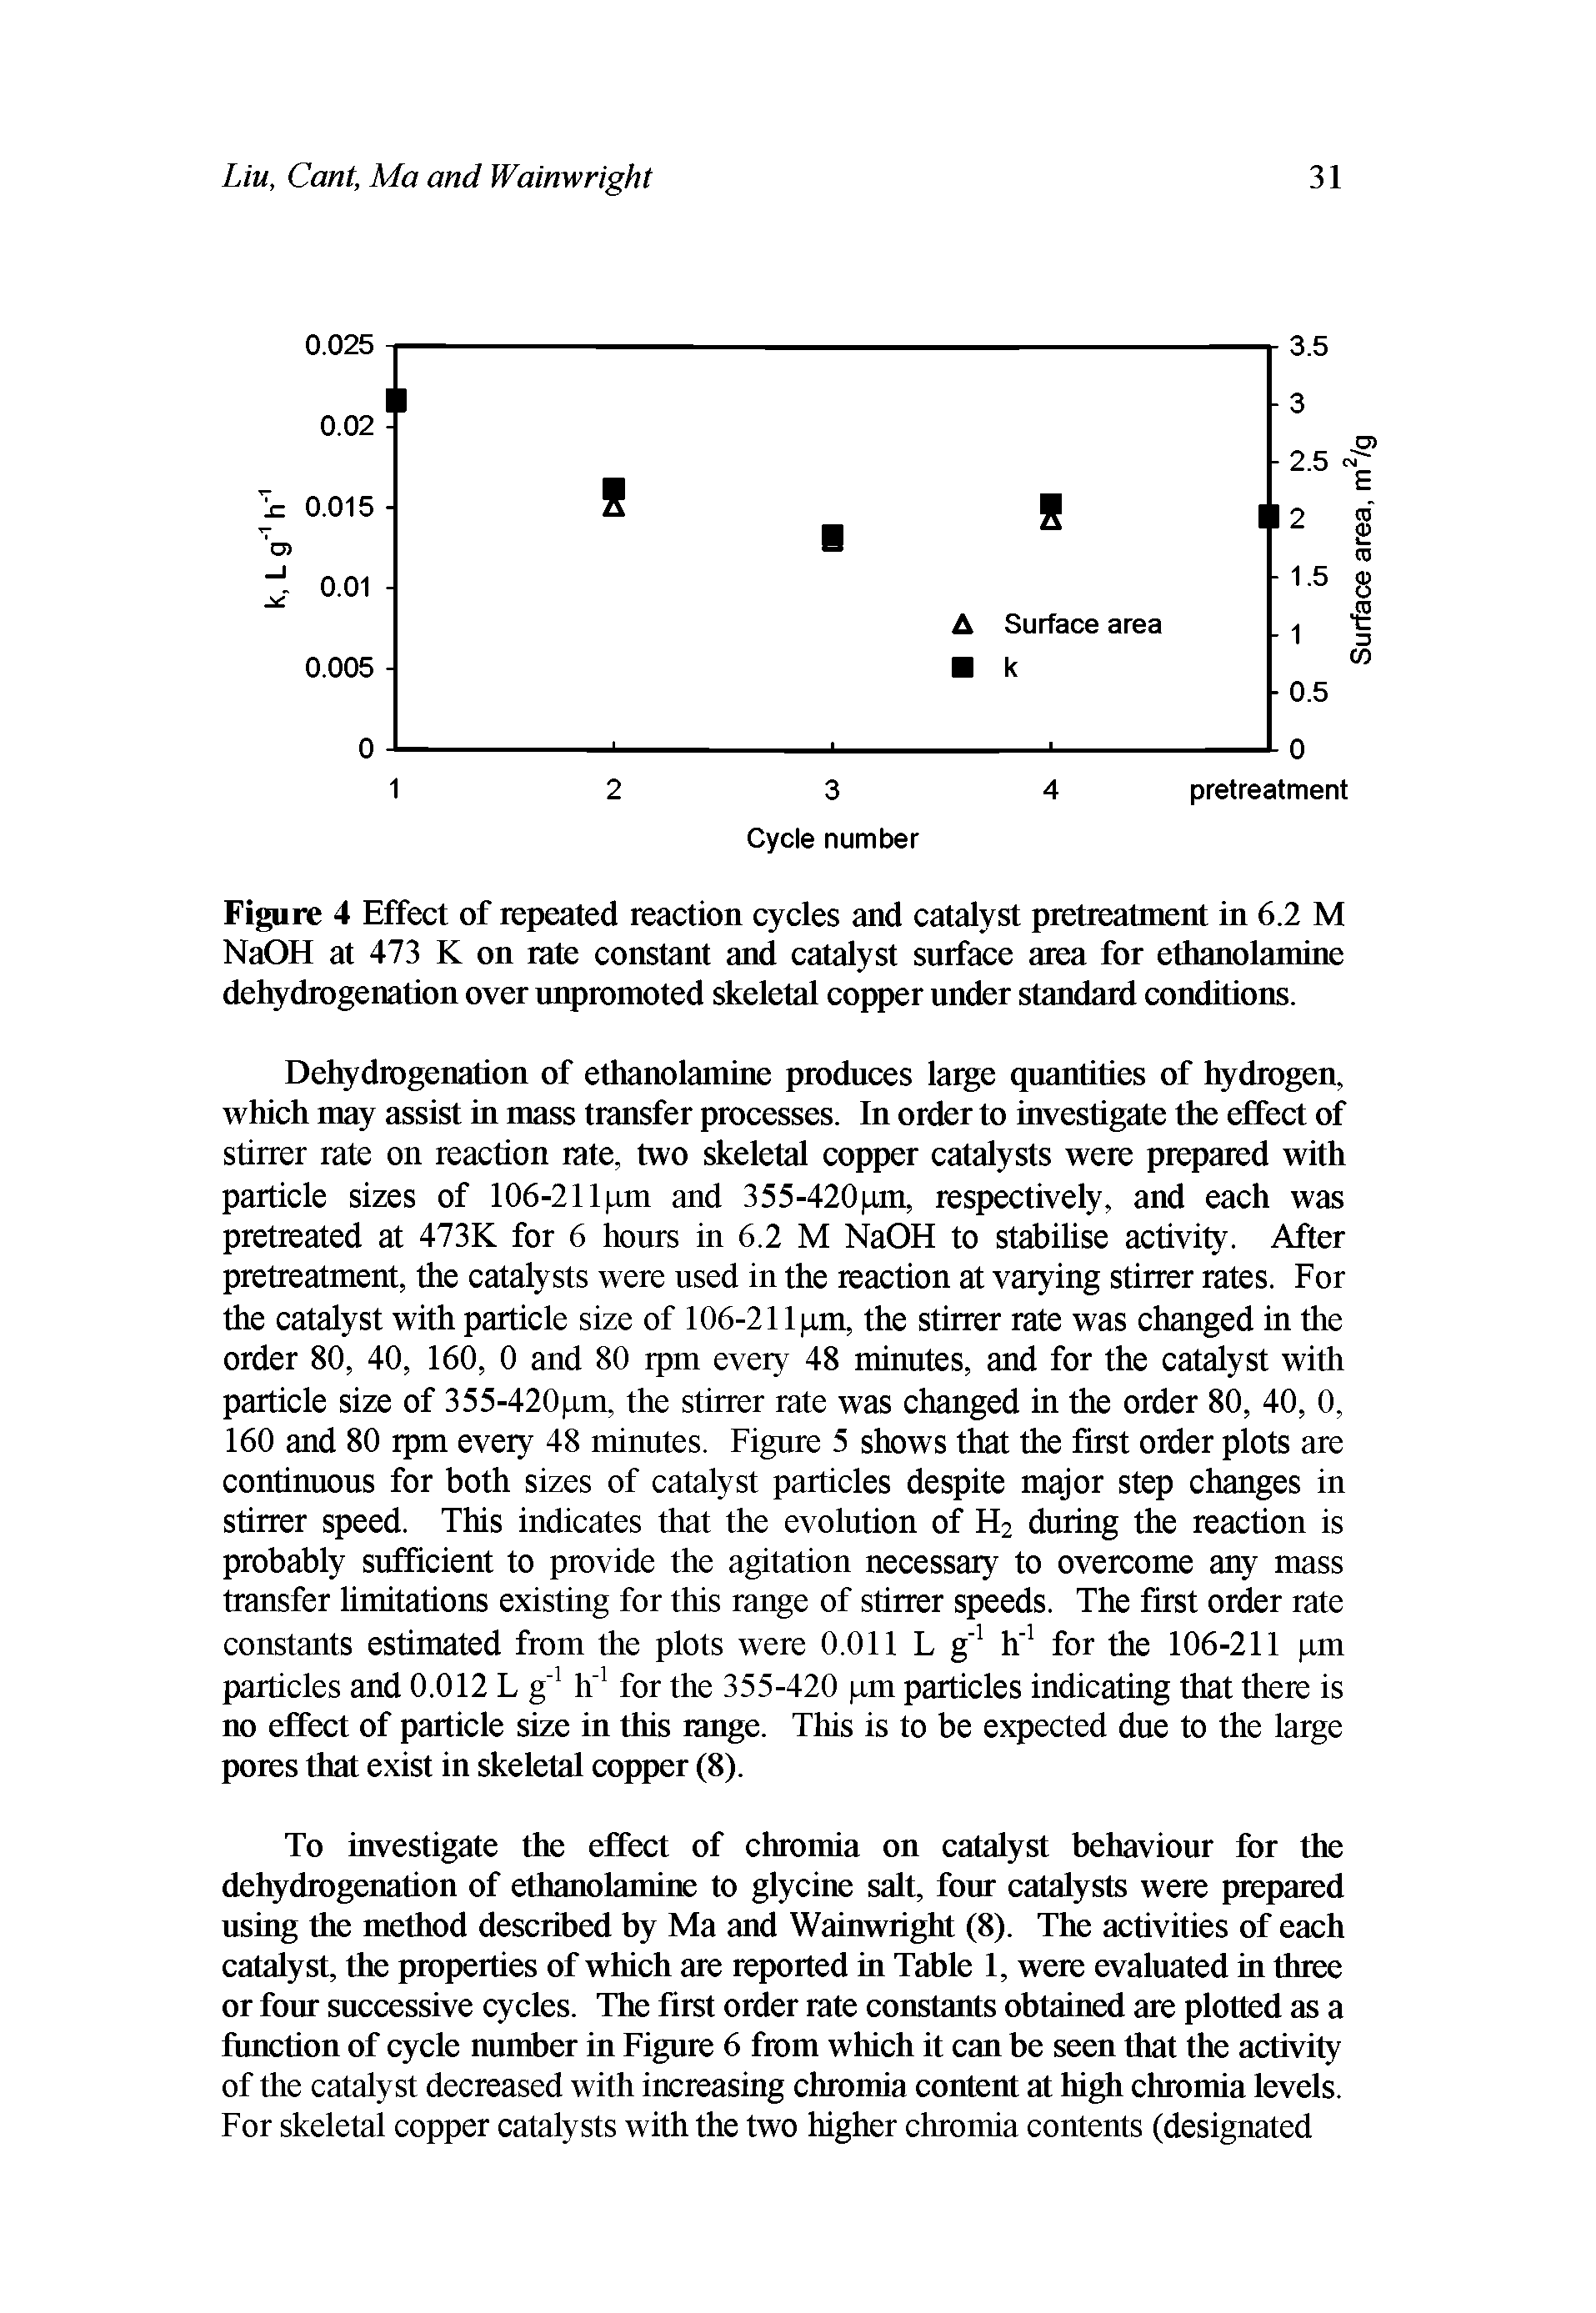 Figure 4 Effect of repeated reaction cycles and catalyst pretreatment in 6.2 M NaOH at 473 K on rate constant and catalyst surface area for ethanolamine dehydrogenation over unpromoted skeletal copper under standard conditions.